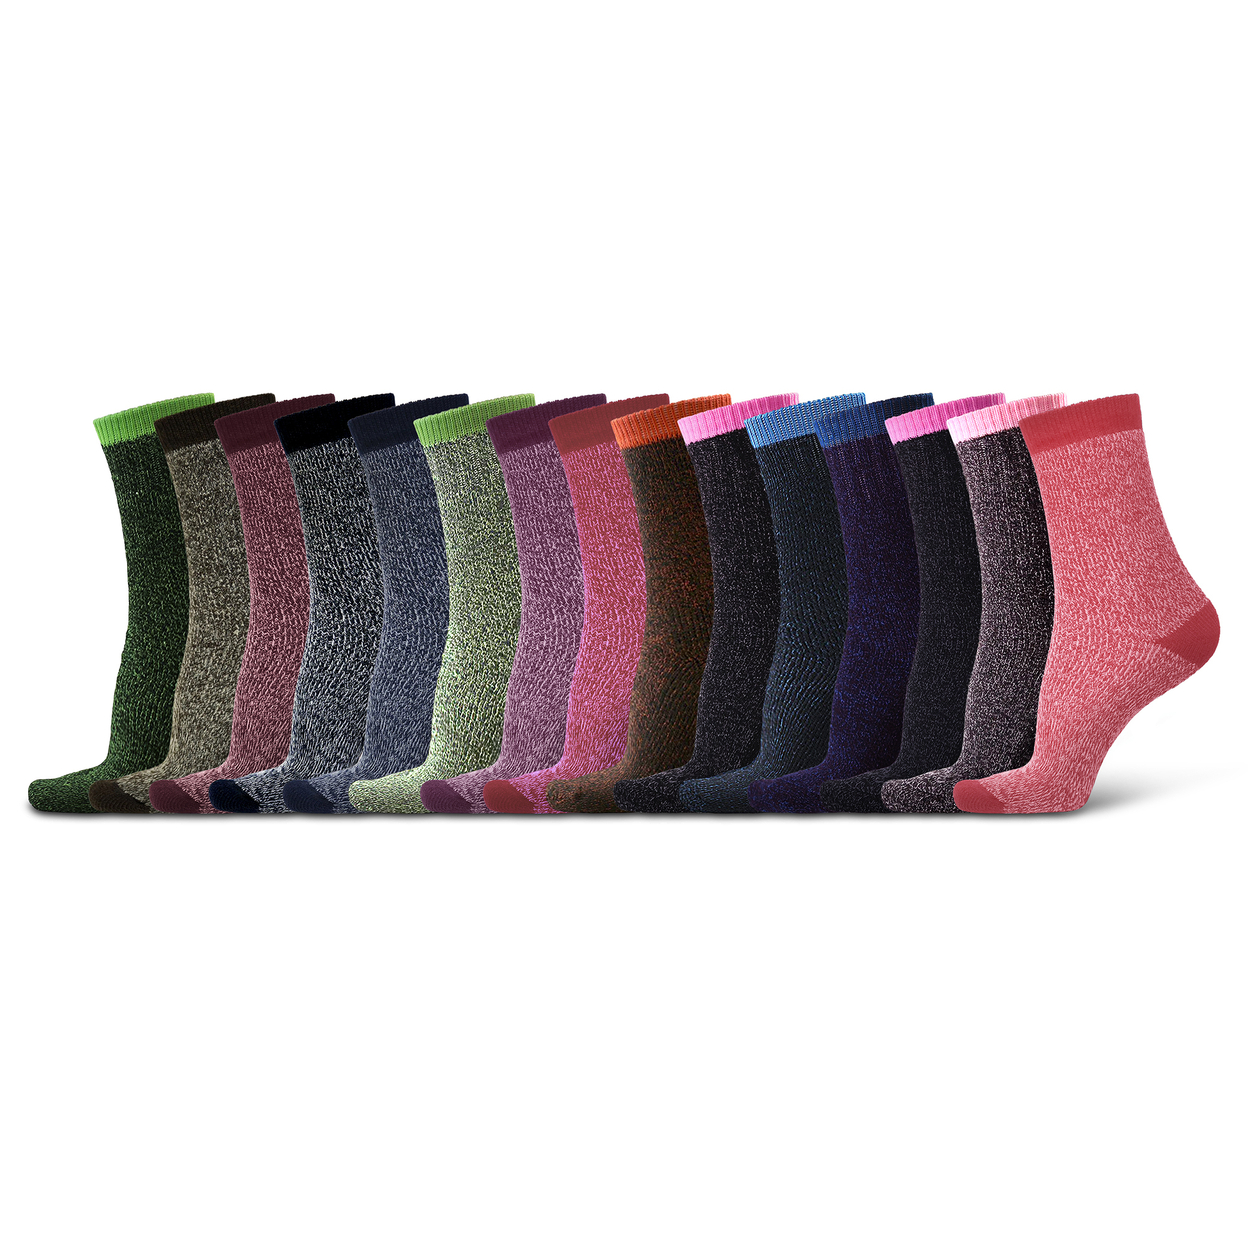 Multi-Pairs: Women's Cozy Soft Thick Winter Warm Thermal Insulated Heated Crew Socks - 3-pairs